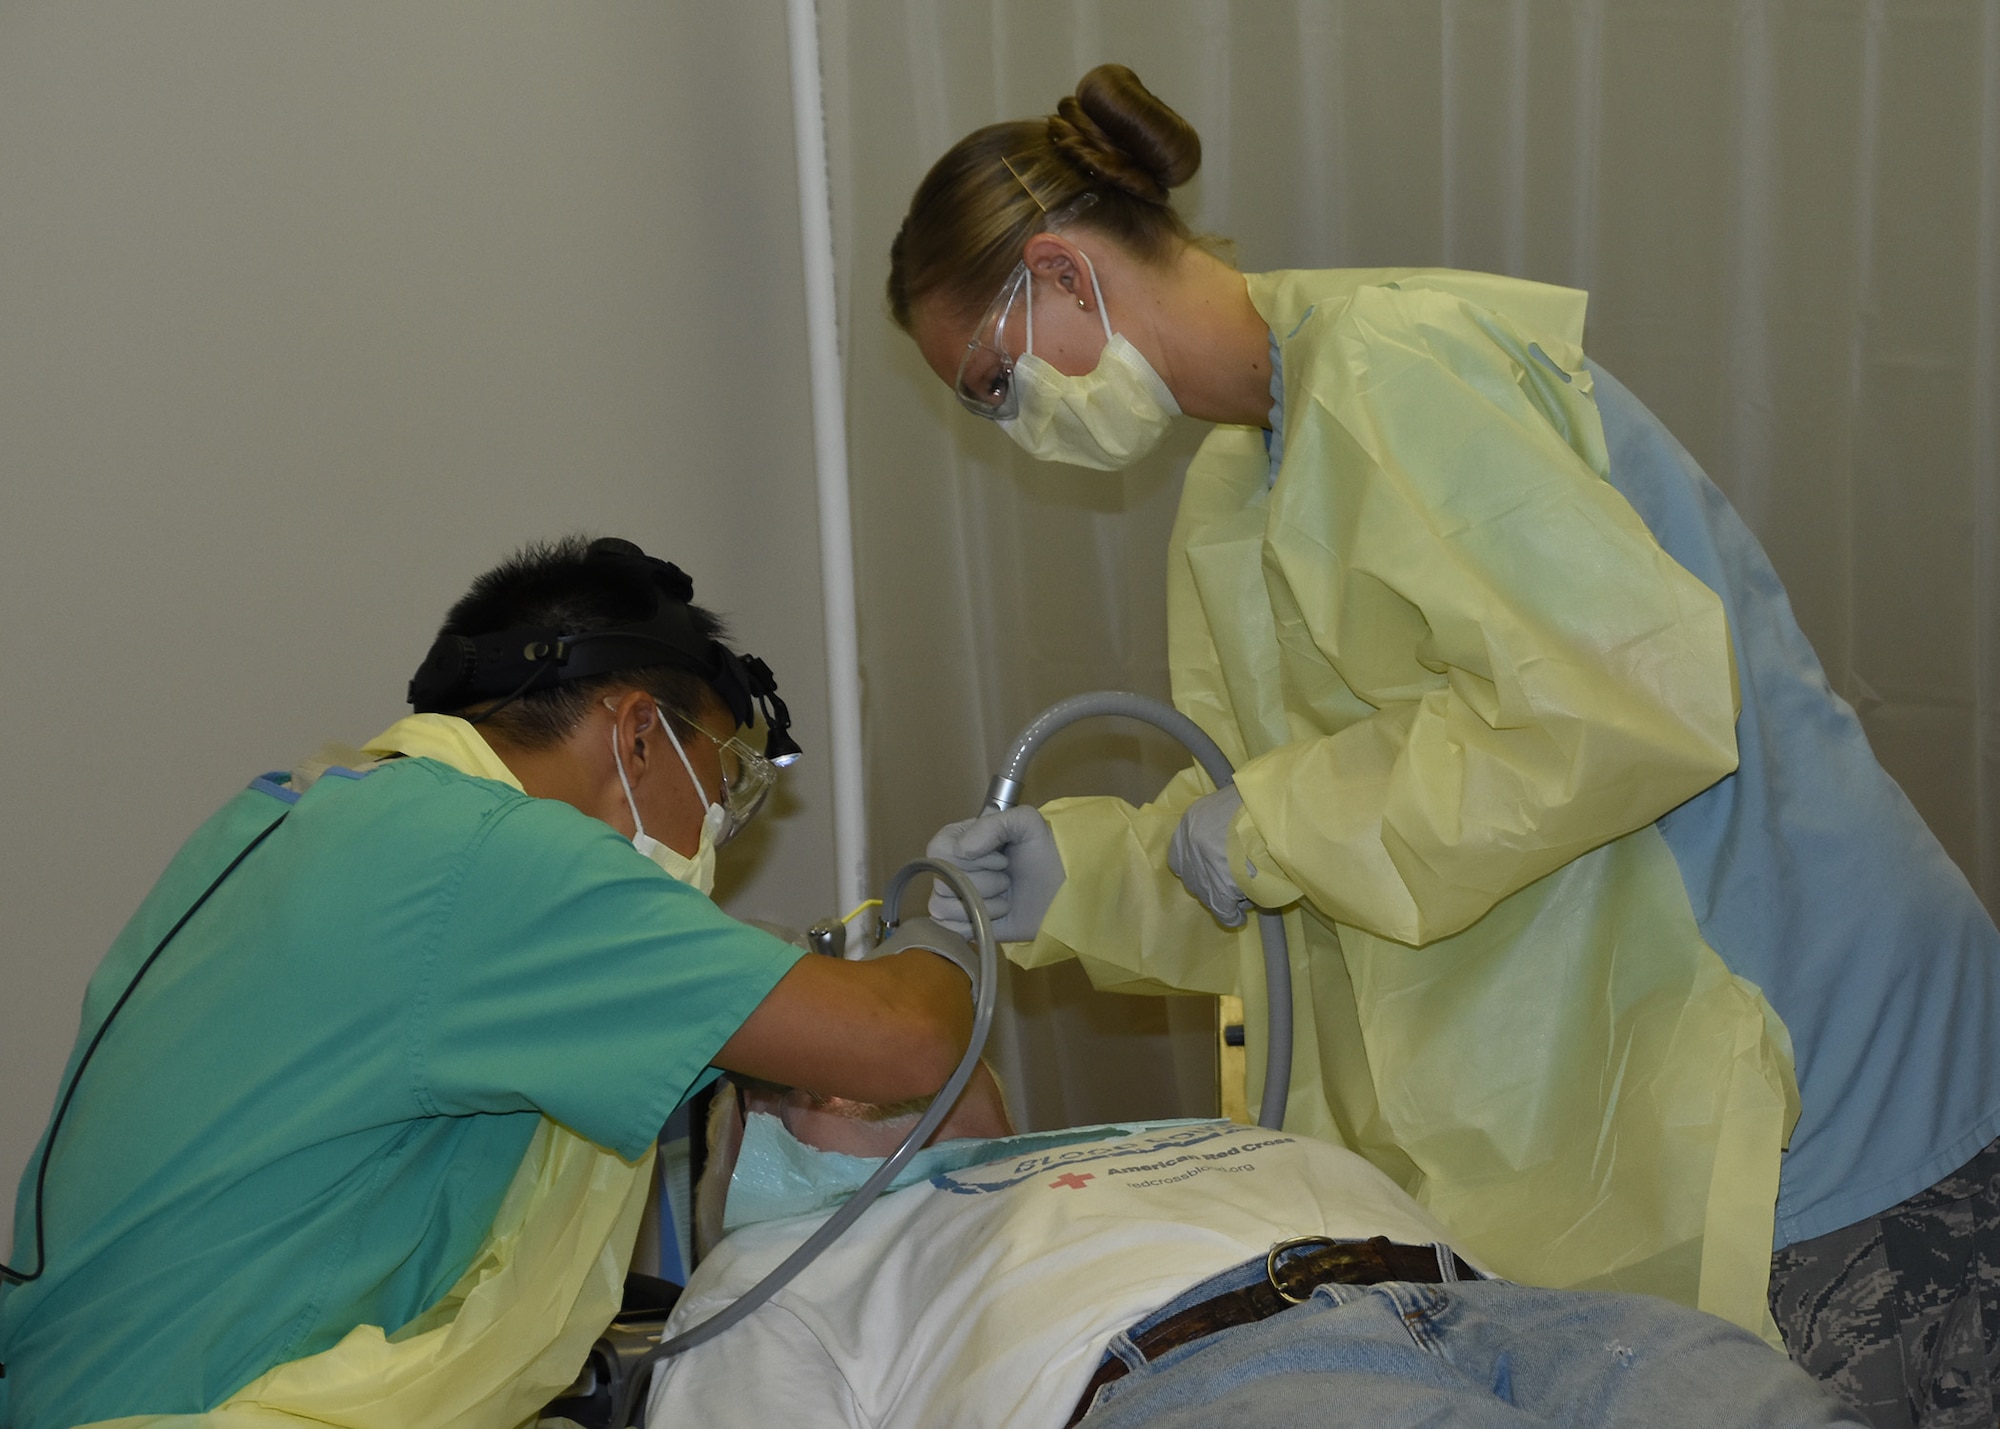 Air National Guard, Navy (Active and Reserve), and Active Component Air Force dentists trained and provided dental care at a field-condition medical facility set up at the Eastwood Memorial United Methodist Church in Caruthersville, Missouri, from Sept. 13-21, during Operation Healthy Delta Innovative Readiness Training.